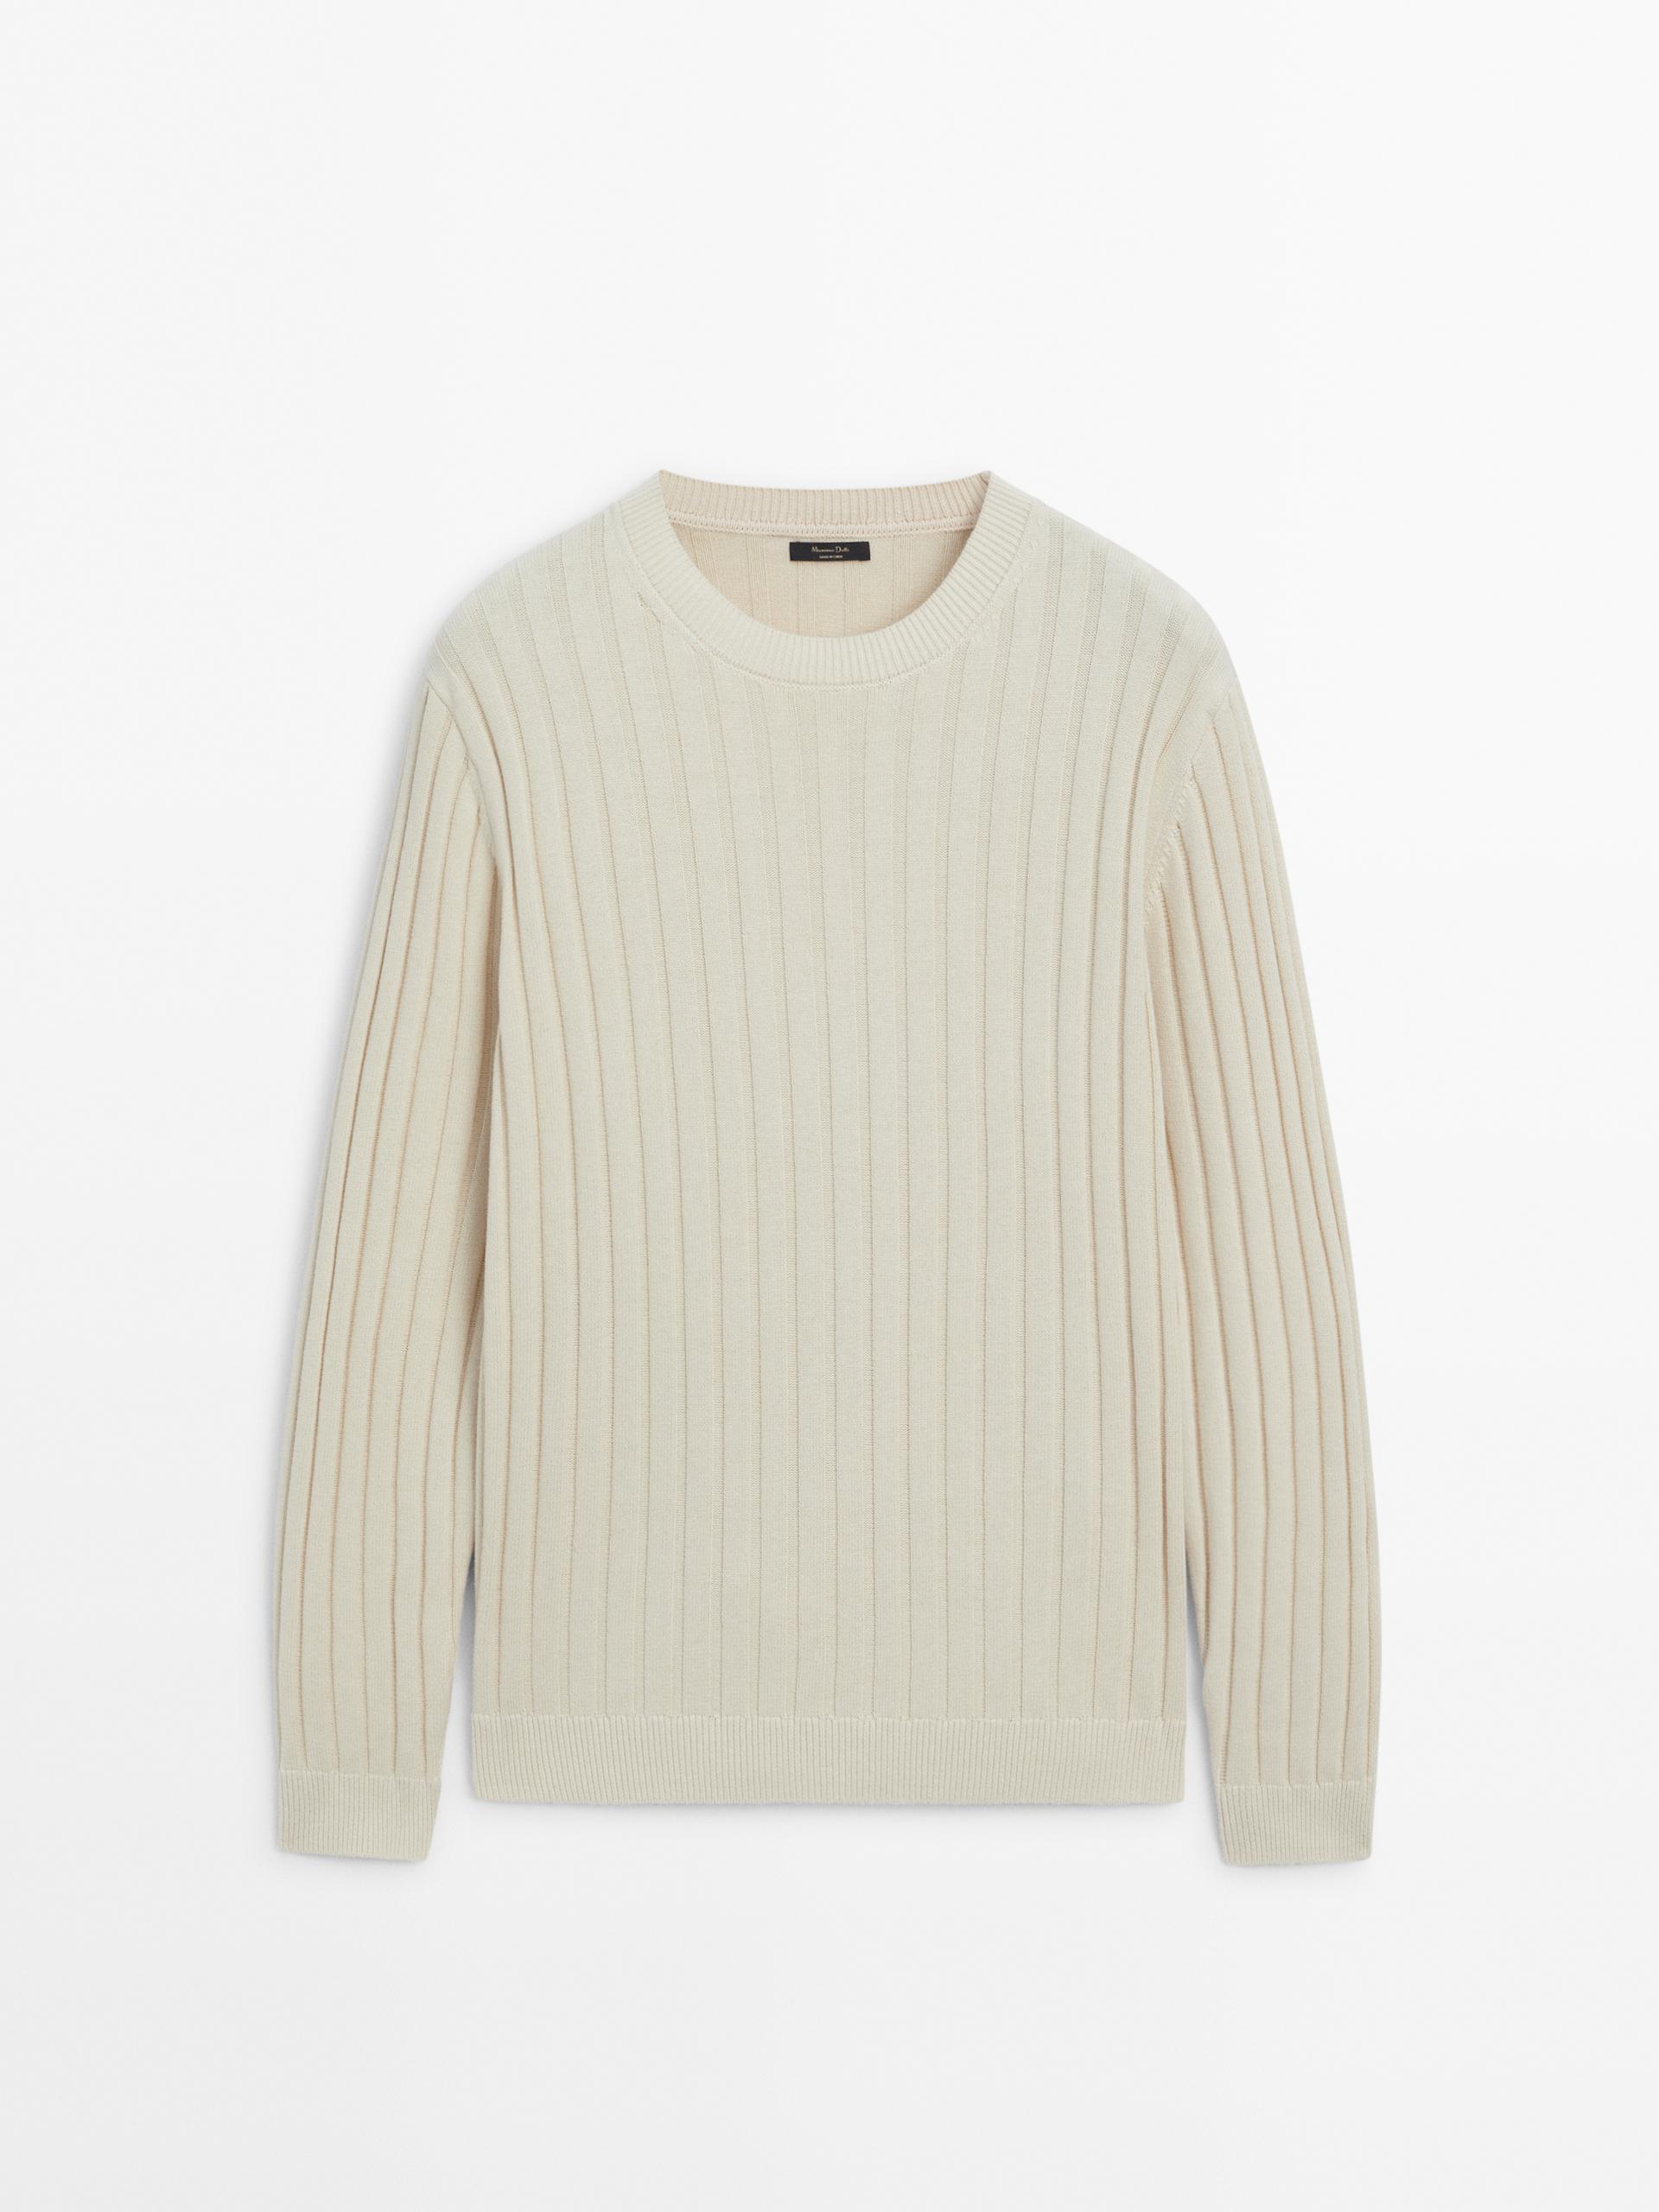 Buy Nelly Everyday Rib Knit Sweater - Beige